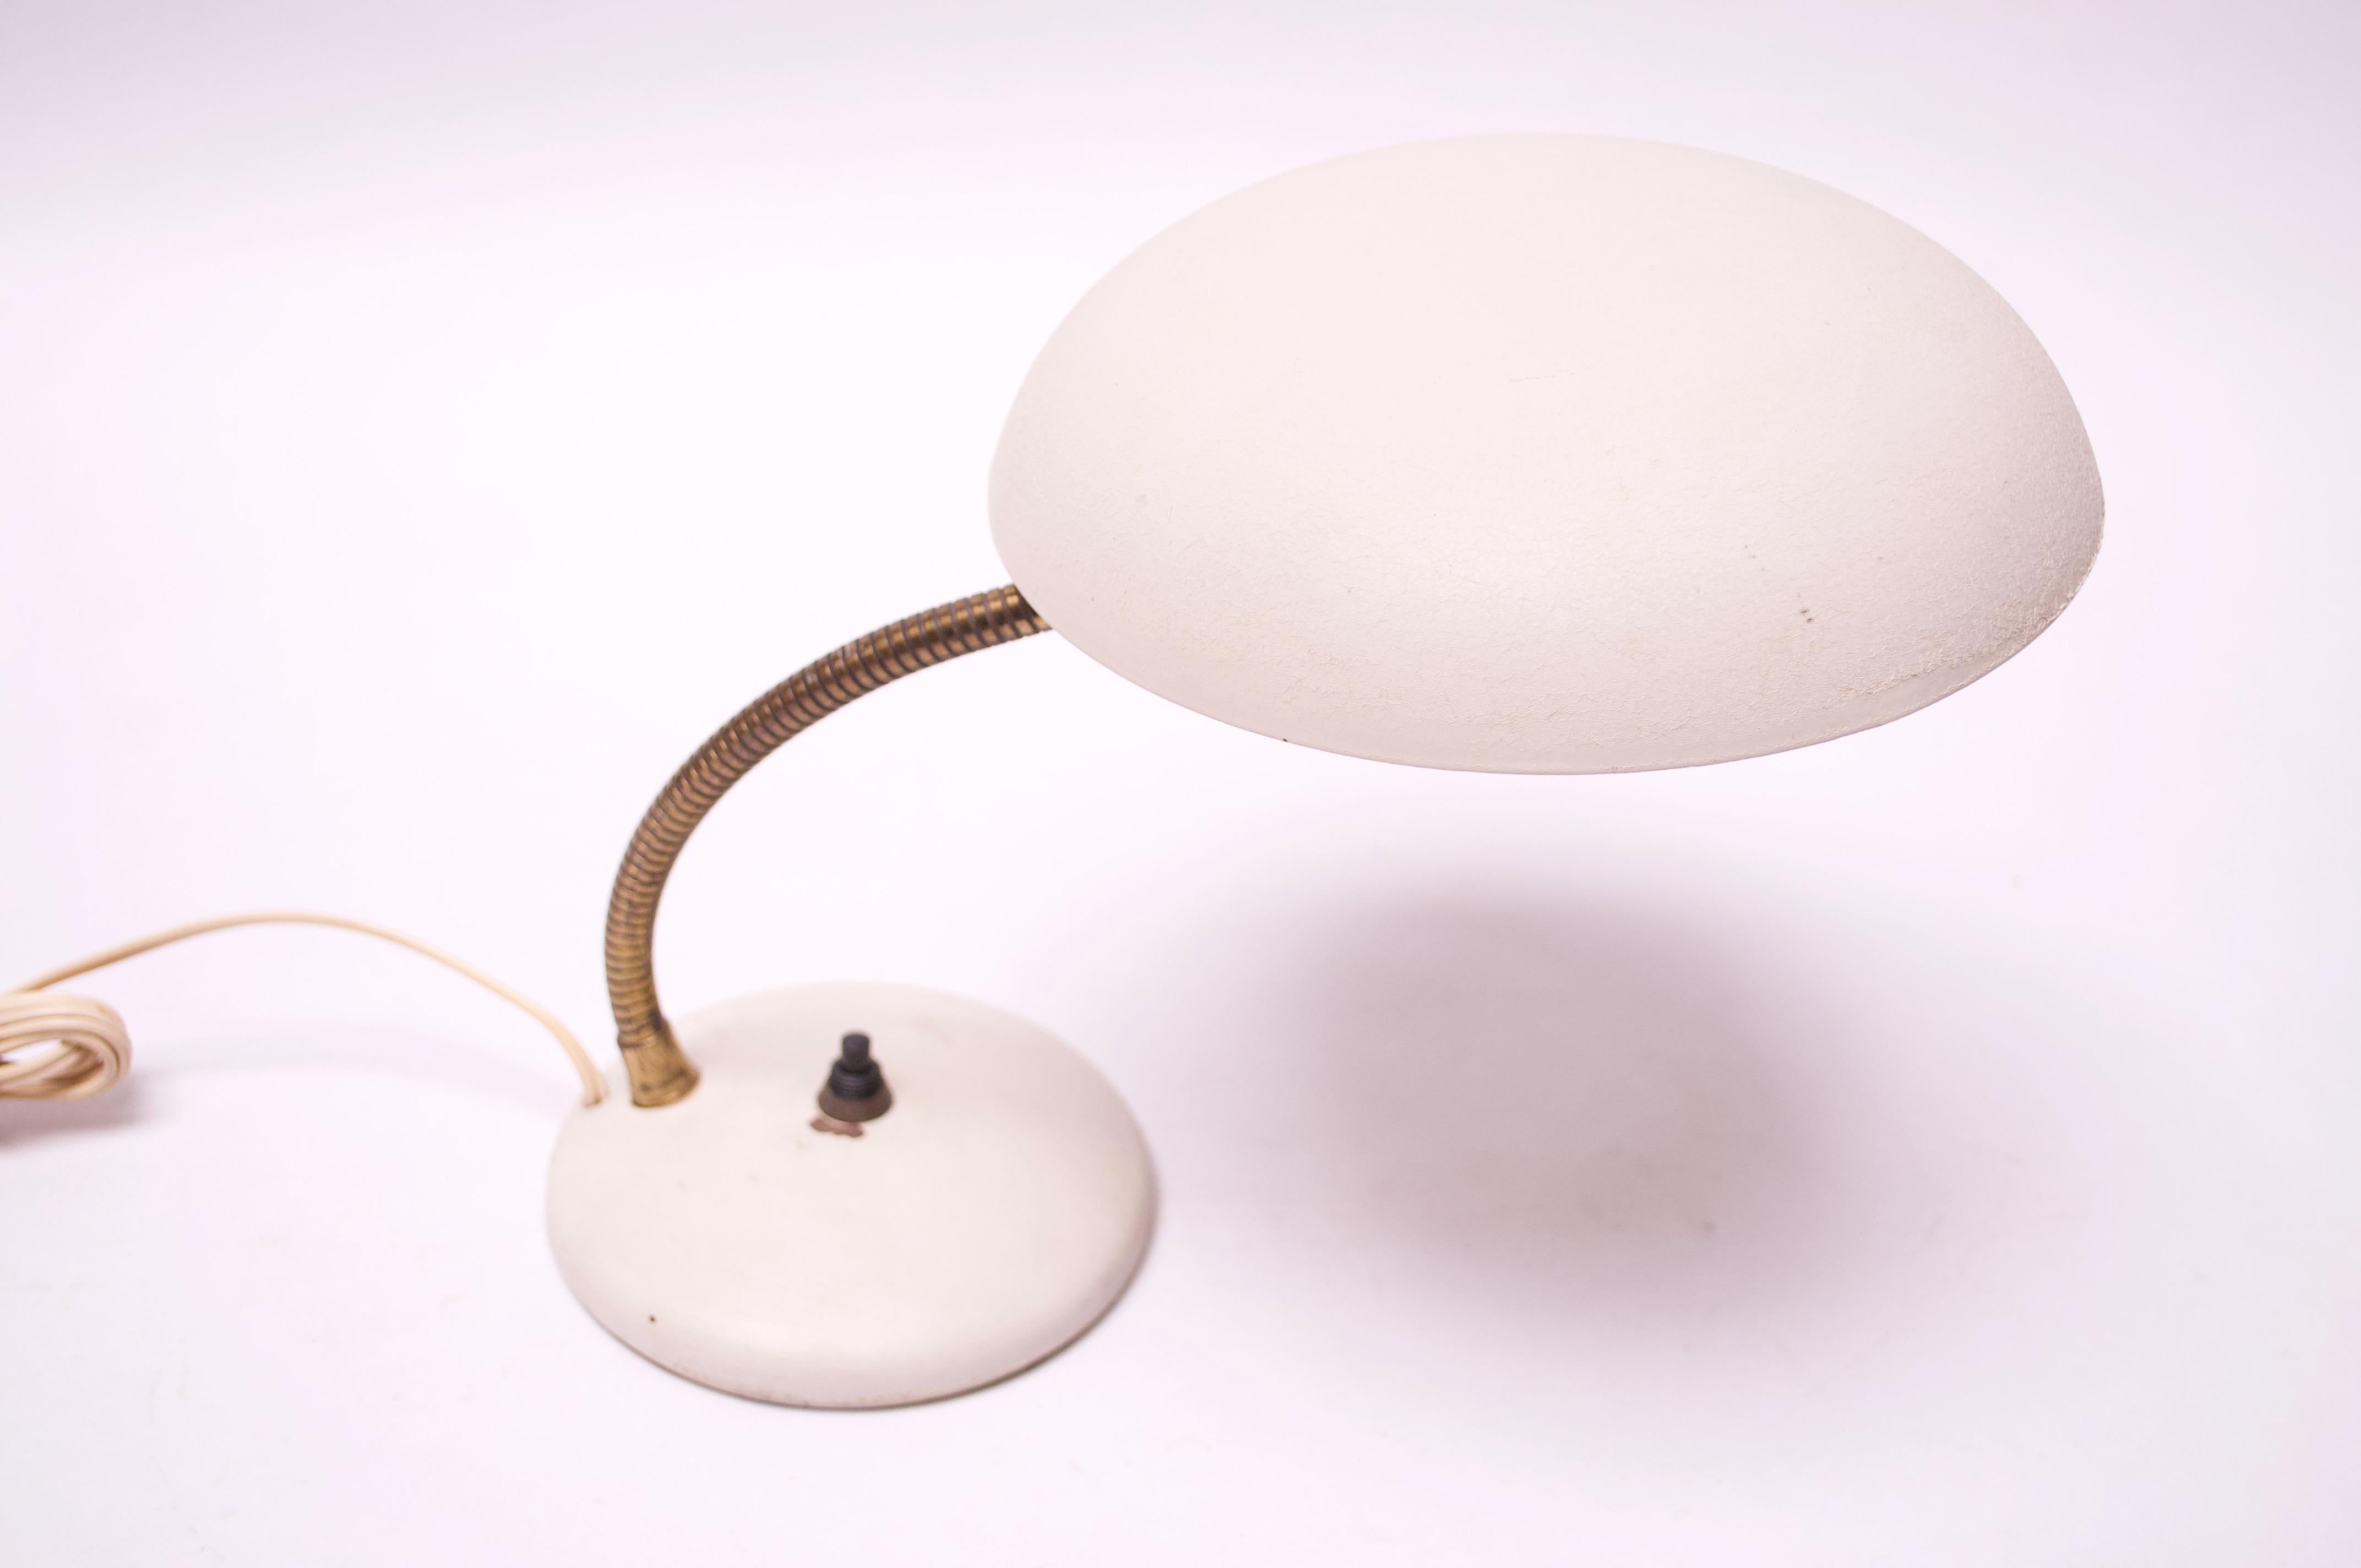 Petite fully adjustable table lamp in original off-white metal. Saucer shade can pivot in a full 365 degree rotation, and the gooseneck arm feature allows for full height adjustability.  Minor wear to white paint (scuffs to exterior shade, spots of